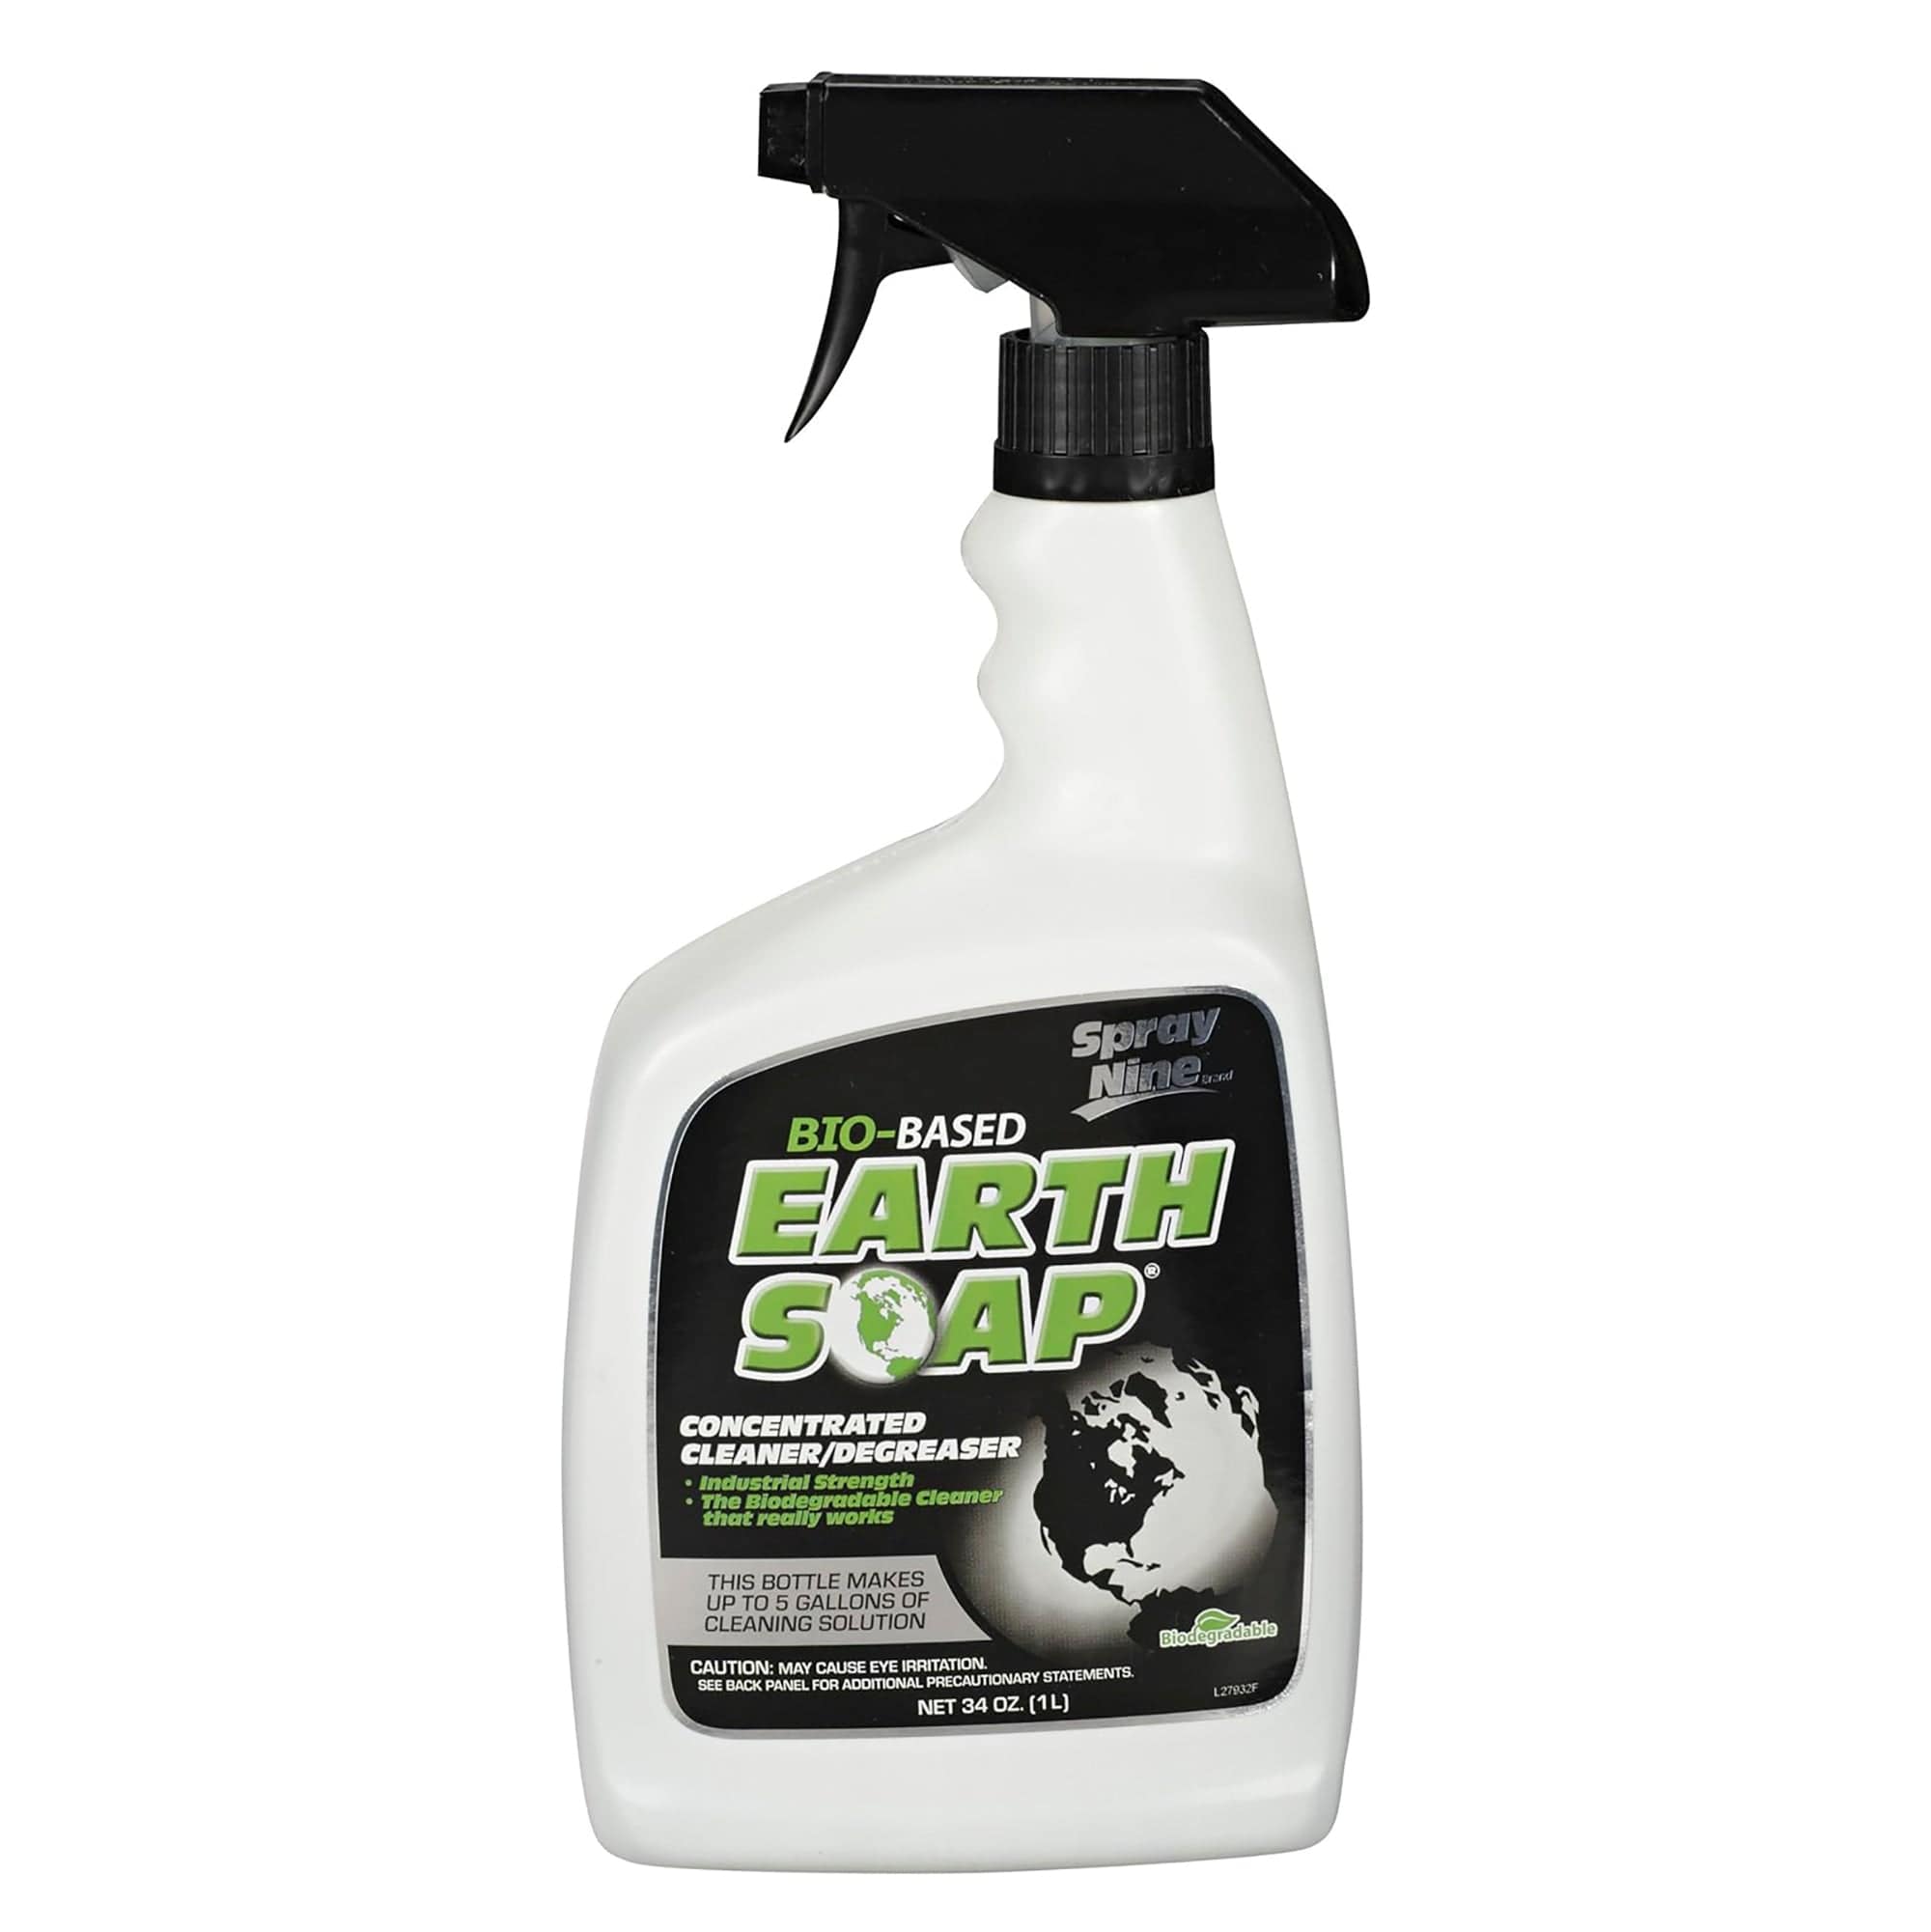 Spray Nine Earth Soap Concentrated Cleaner/Degreaser 32 fl oz. Spray Bottle - Permatex 27932